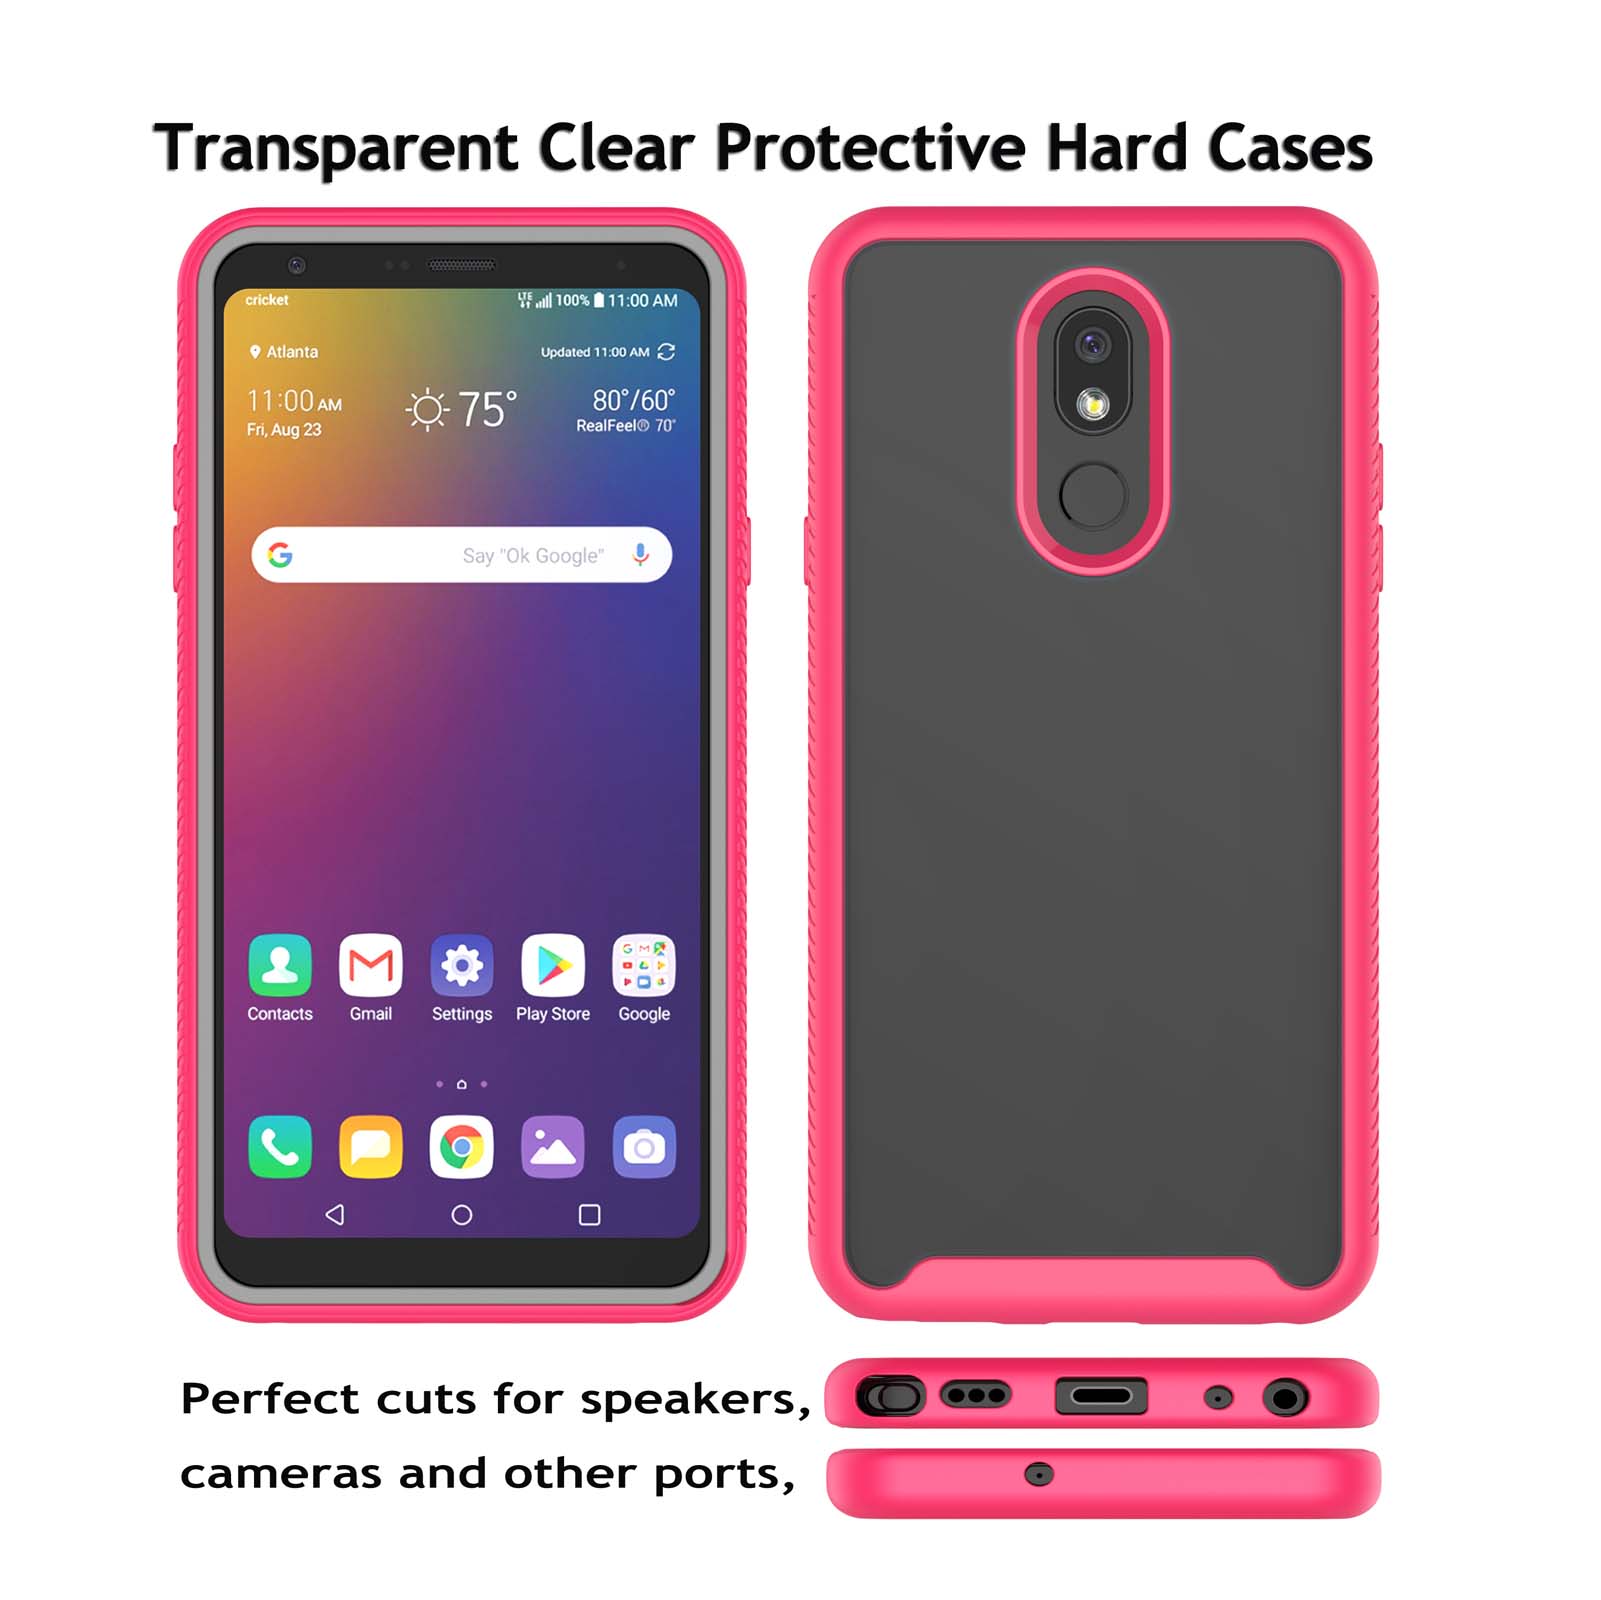 LG Stylo 6 Case, Sturdy Case for 2020 LG Stylo 6, Njjex Full-Body Rugged Transparent Clear Back Bumper Case Cover for LG Stylo 6 6.8" 2020 Not LG Stylo 5 6.2" -Hot Pink - image 2 of 10